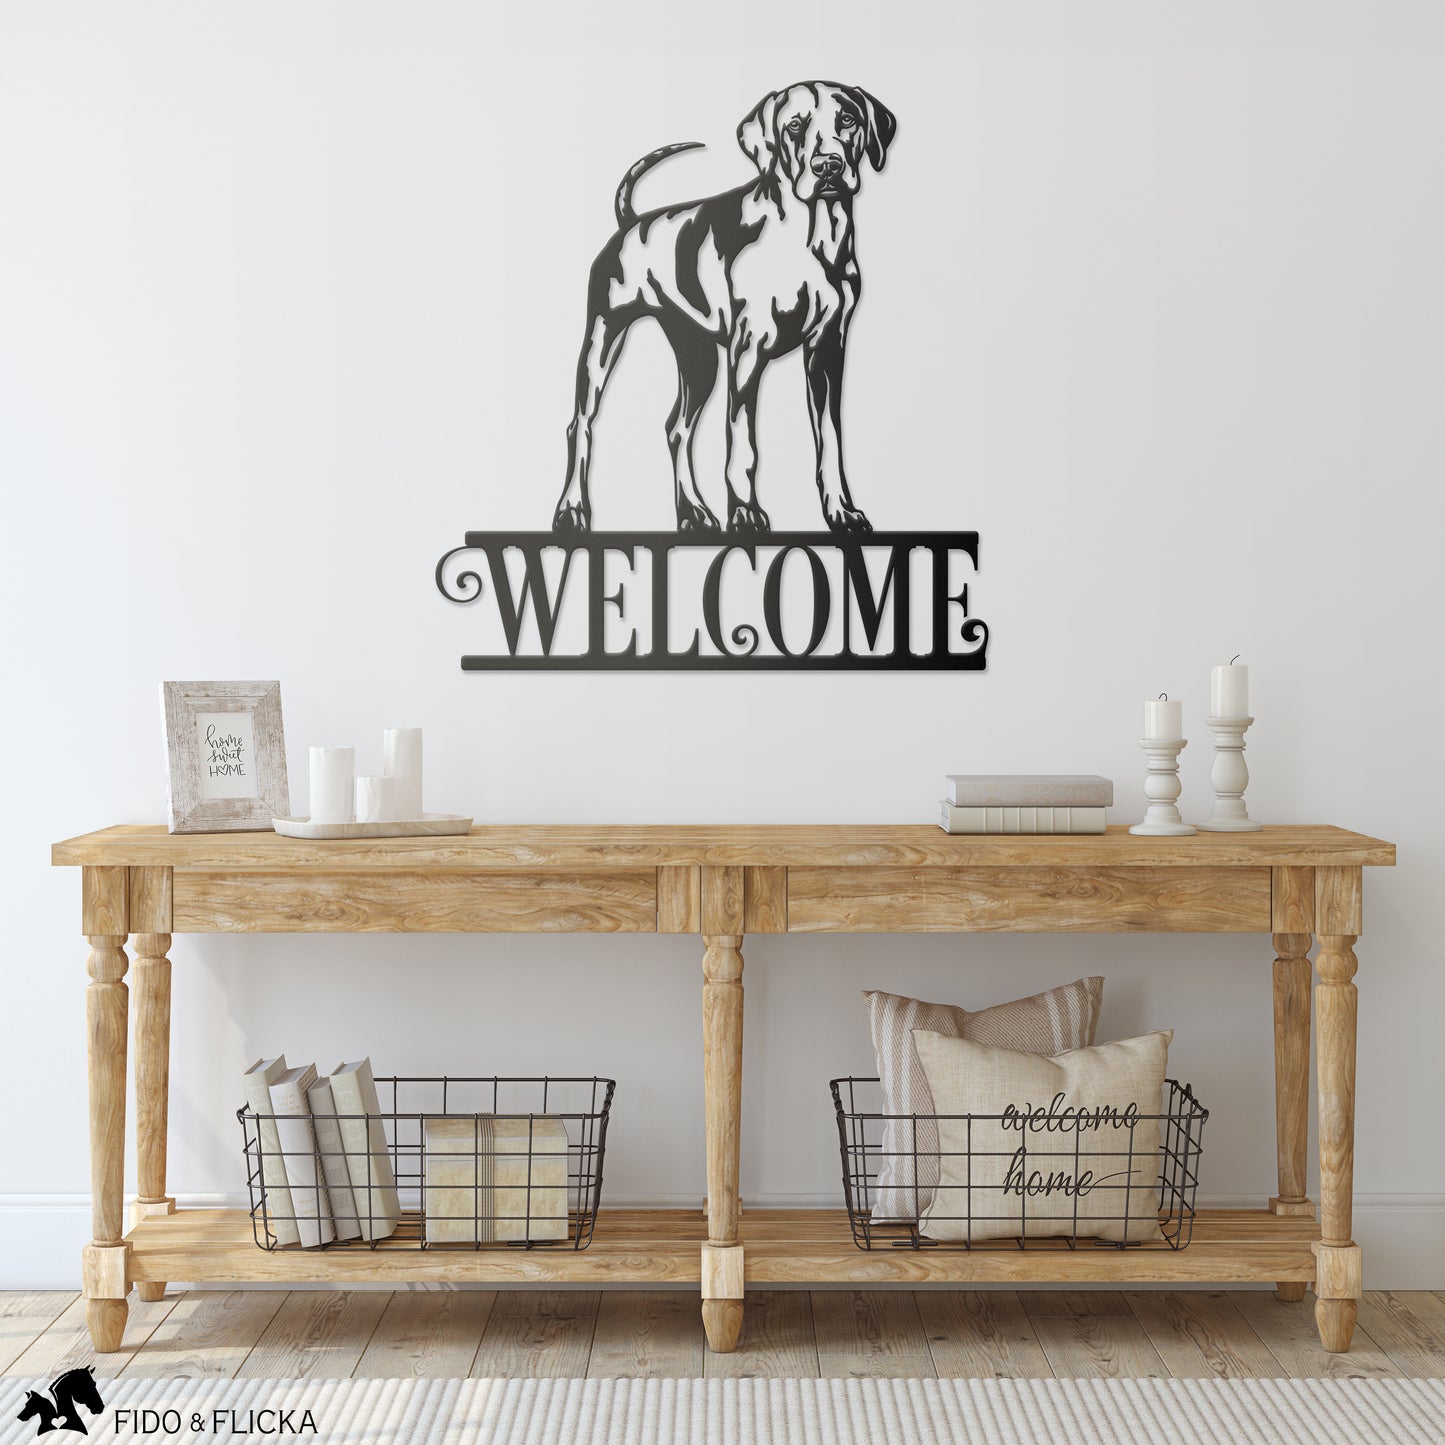 Louisiana Catahoula Leopard Dog metal welcome sign in entry way